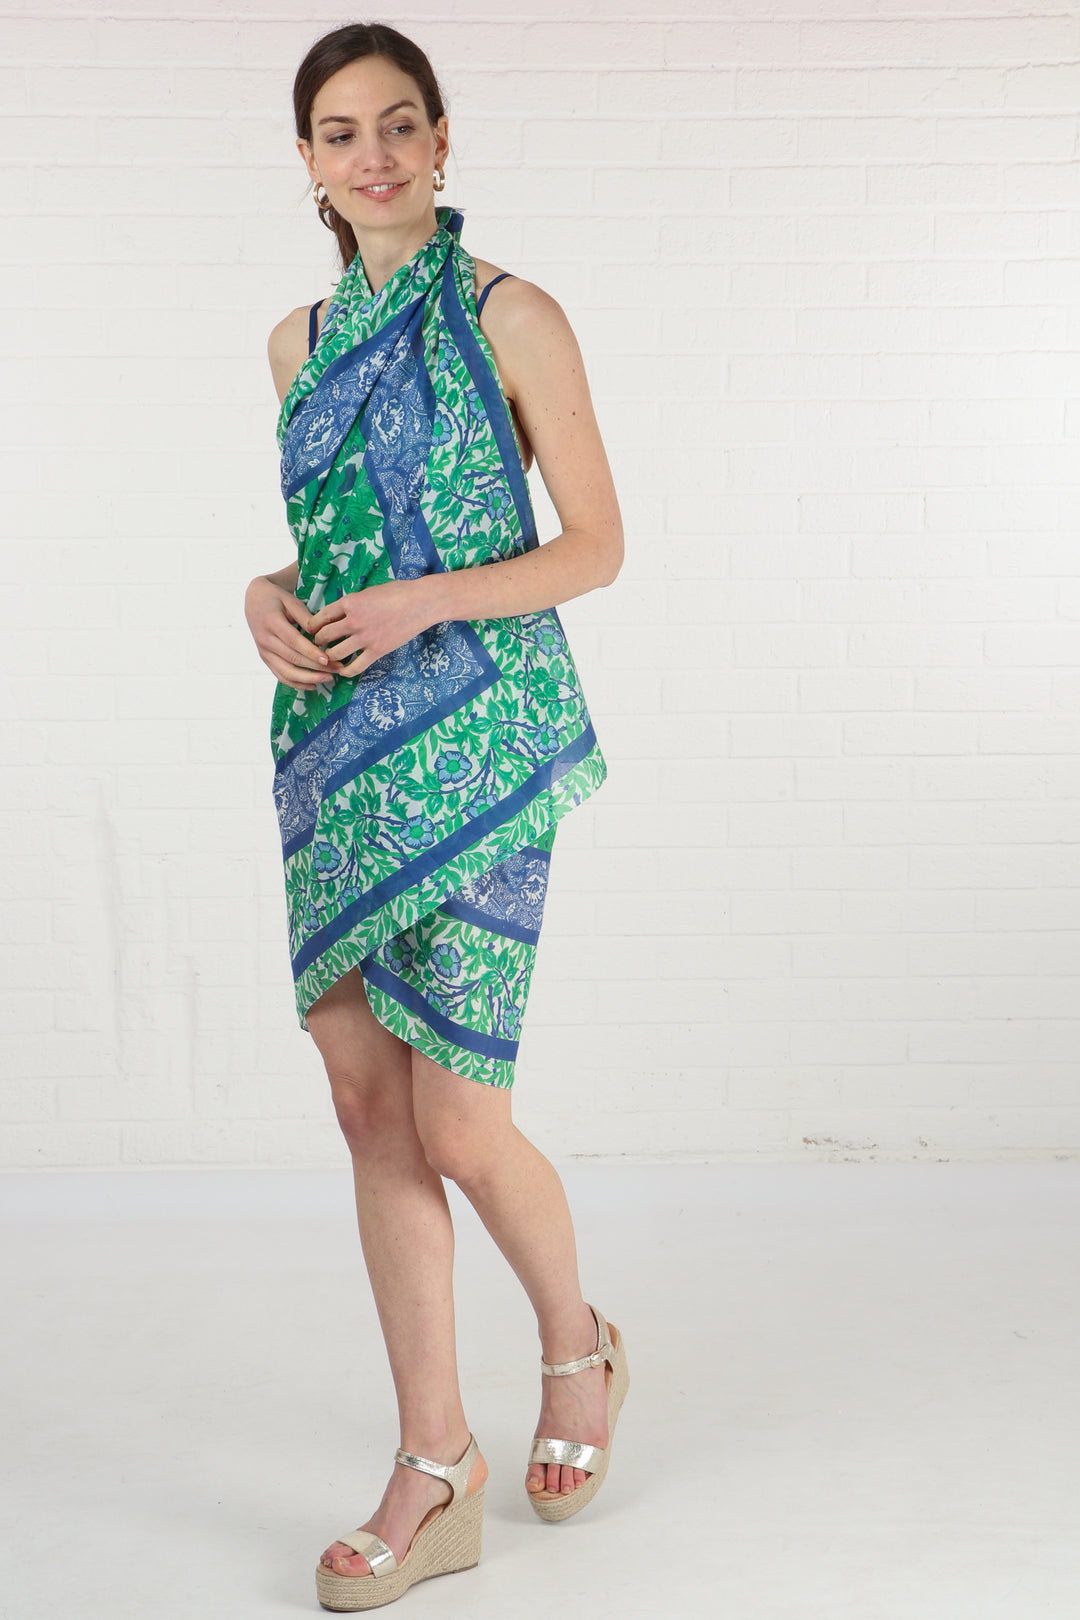 model wearing this green and blue cotton scarf as a beach cover up dress